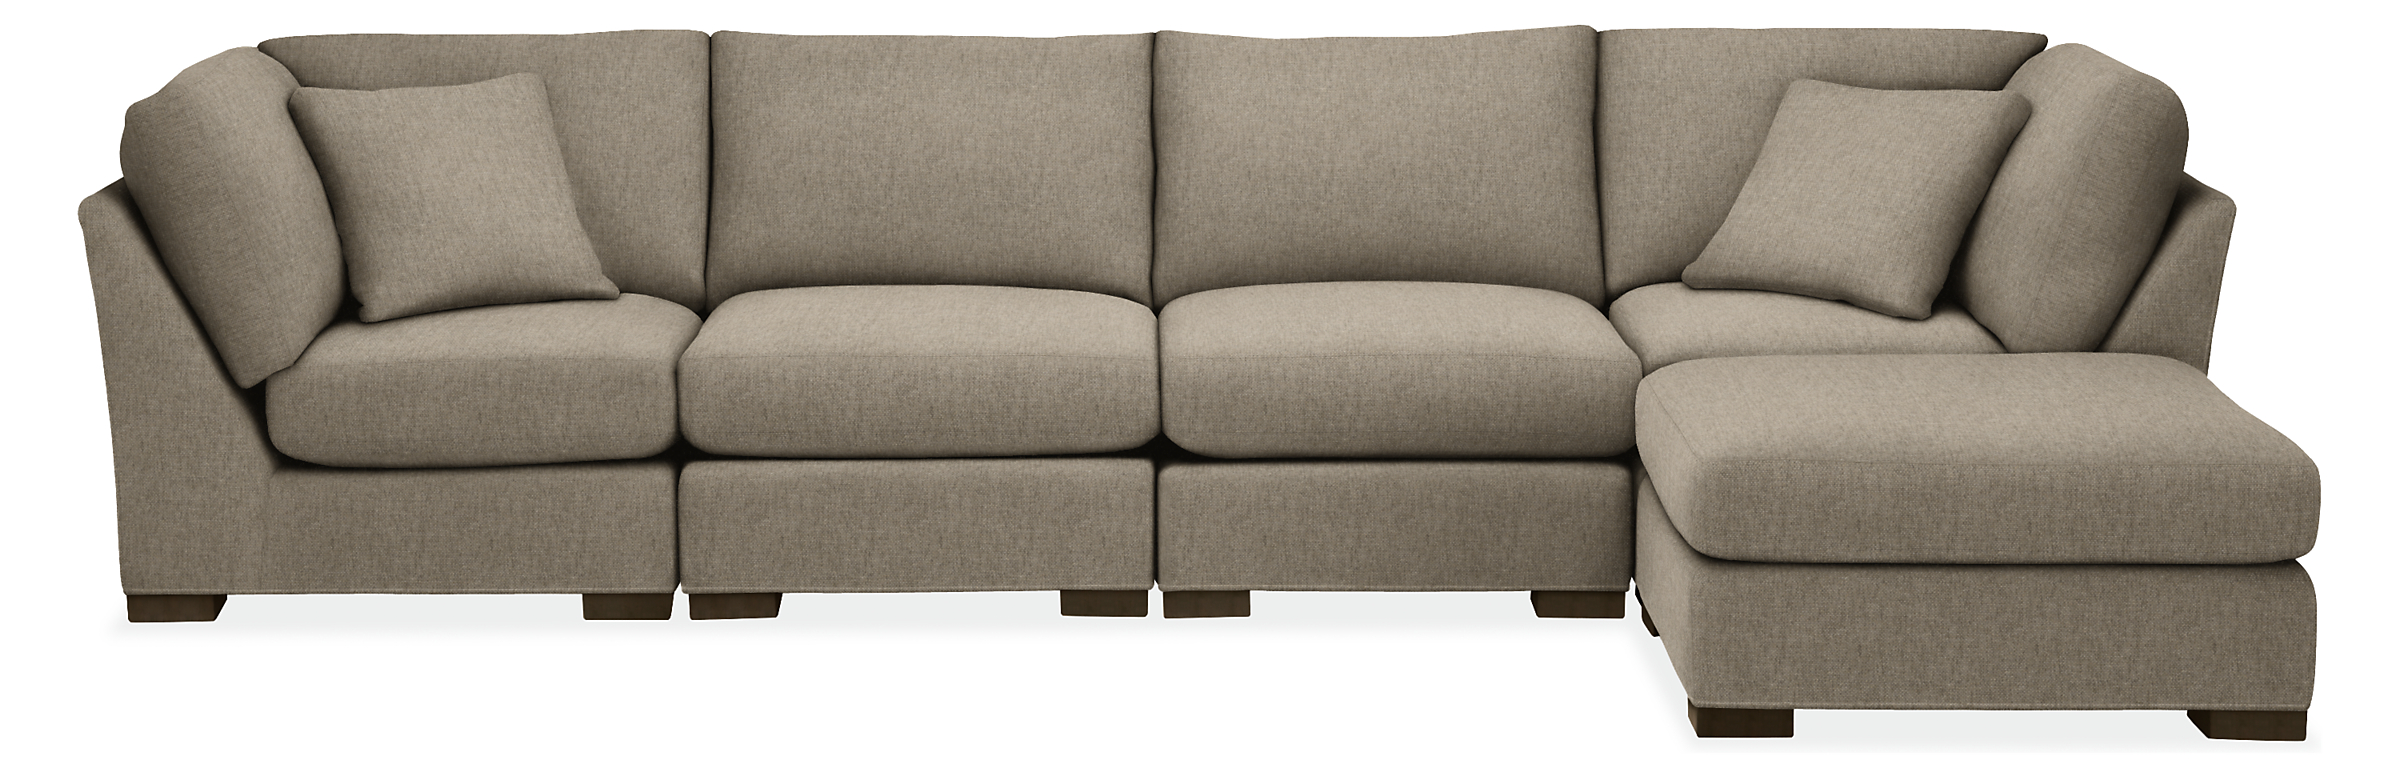 Metro 138x76" Five-Piece Modular Sectional with Ottoman